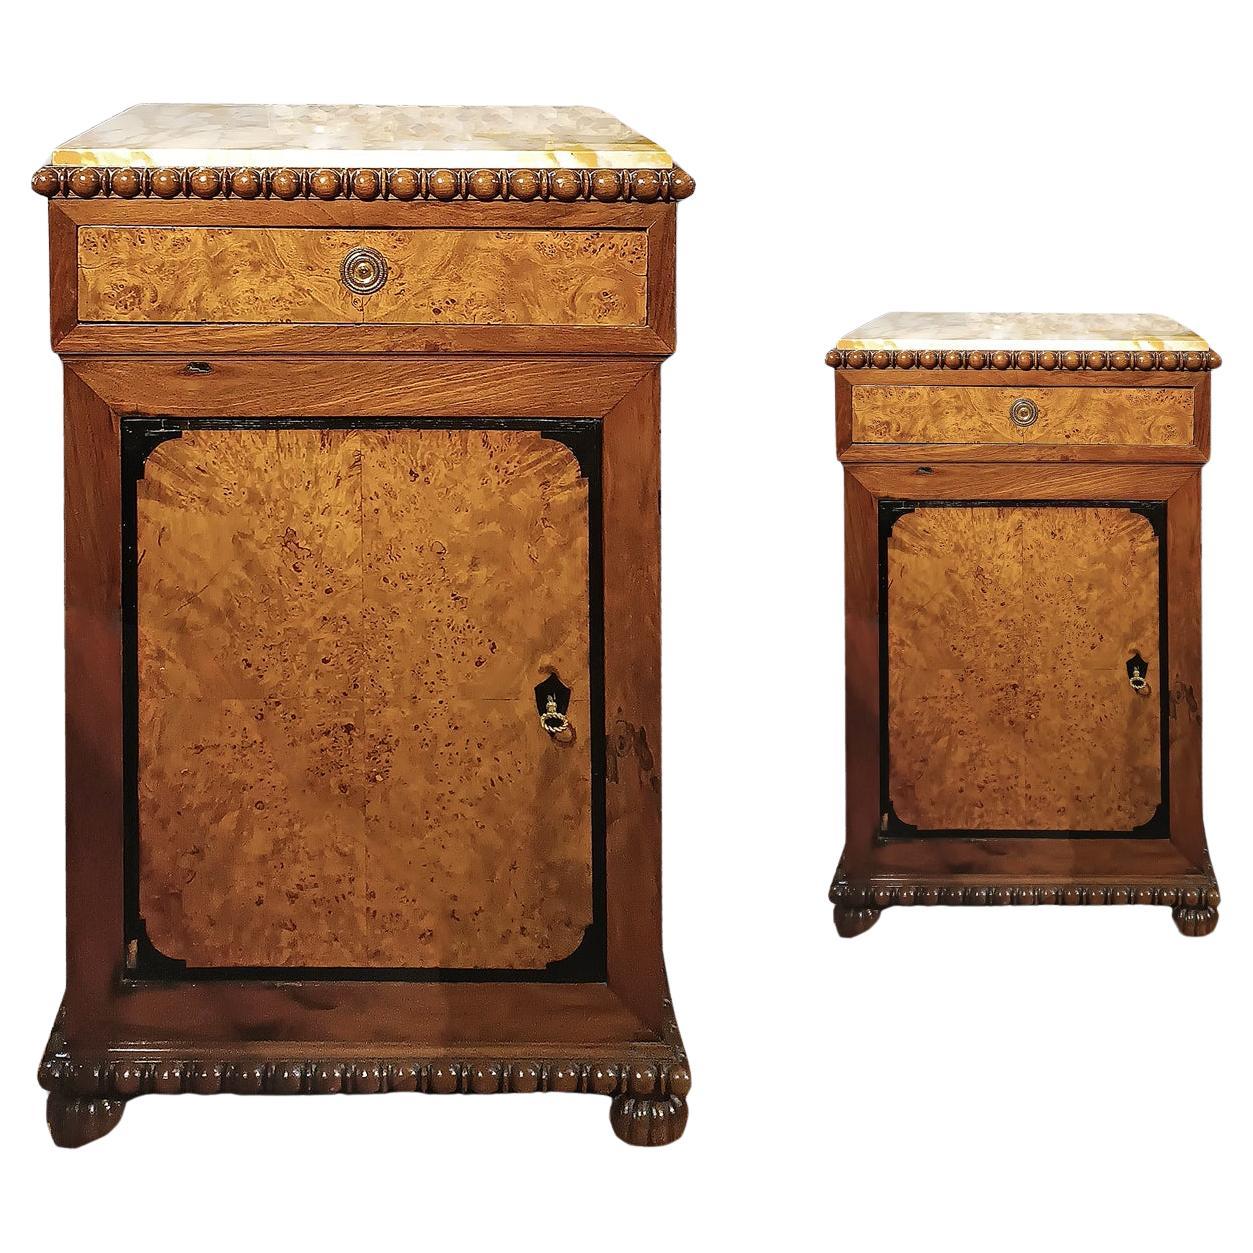 FIRST HALF 19th CENTURY PAIR OF SMALL SIDEBOARDS CHARLES X 